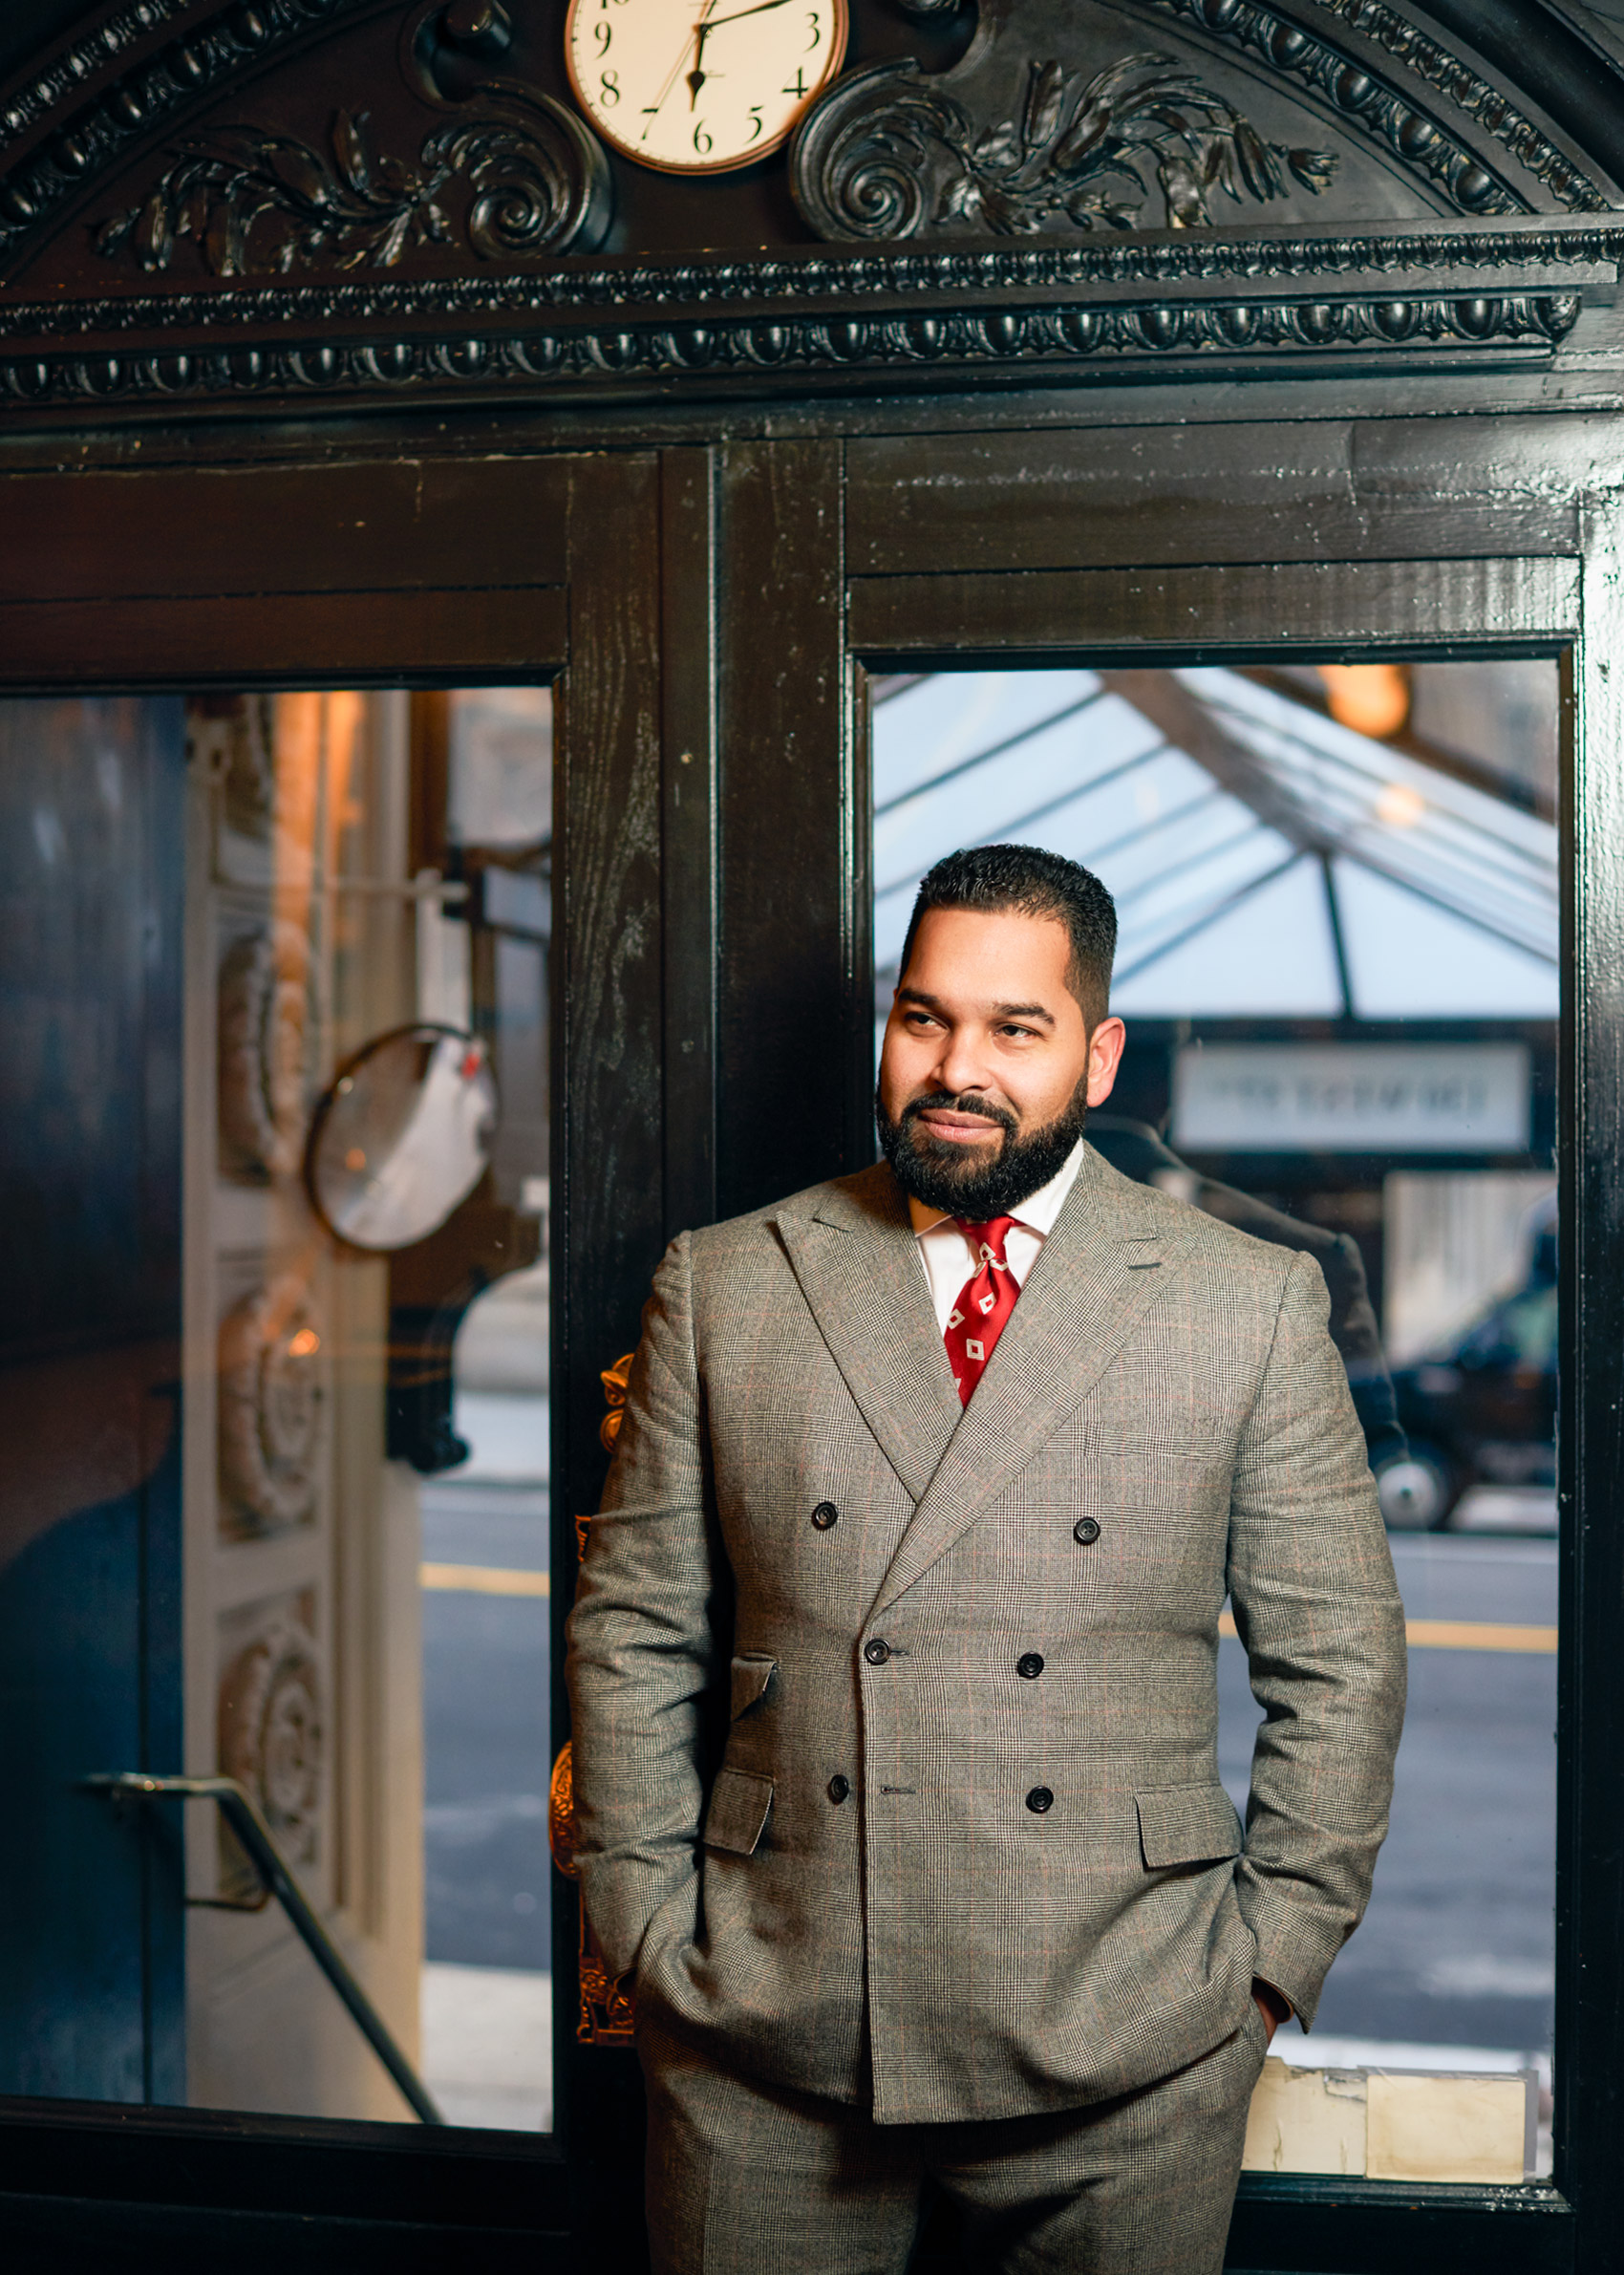 THE DOORMAN WEARS A  CUSTOM- MADE SUIT FOR CAD AND THE DANDY  